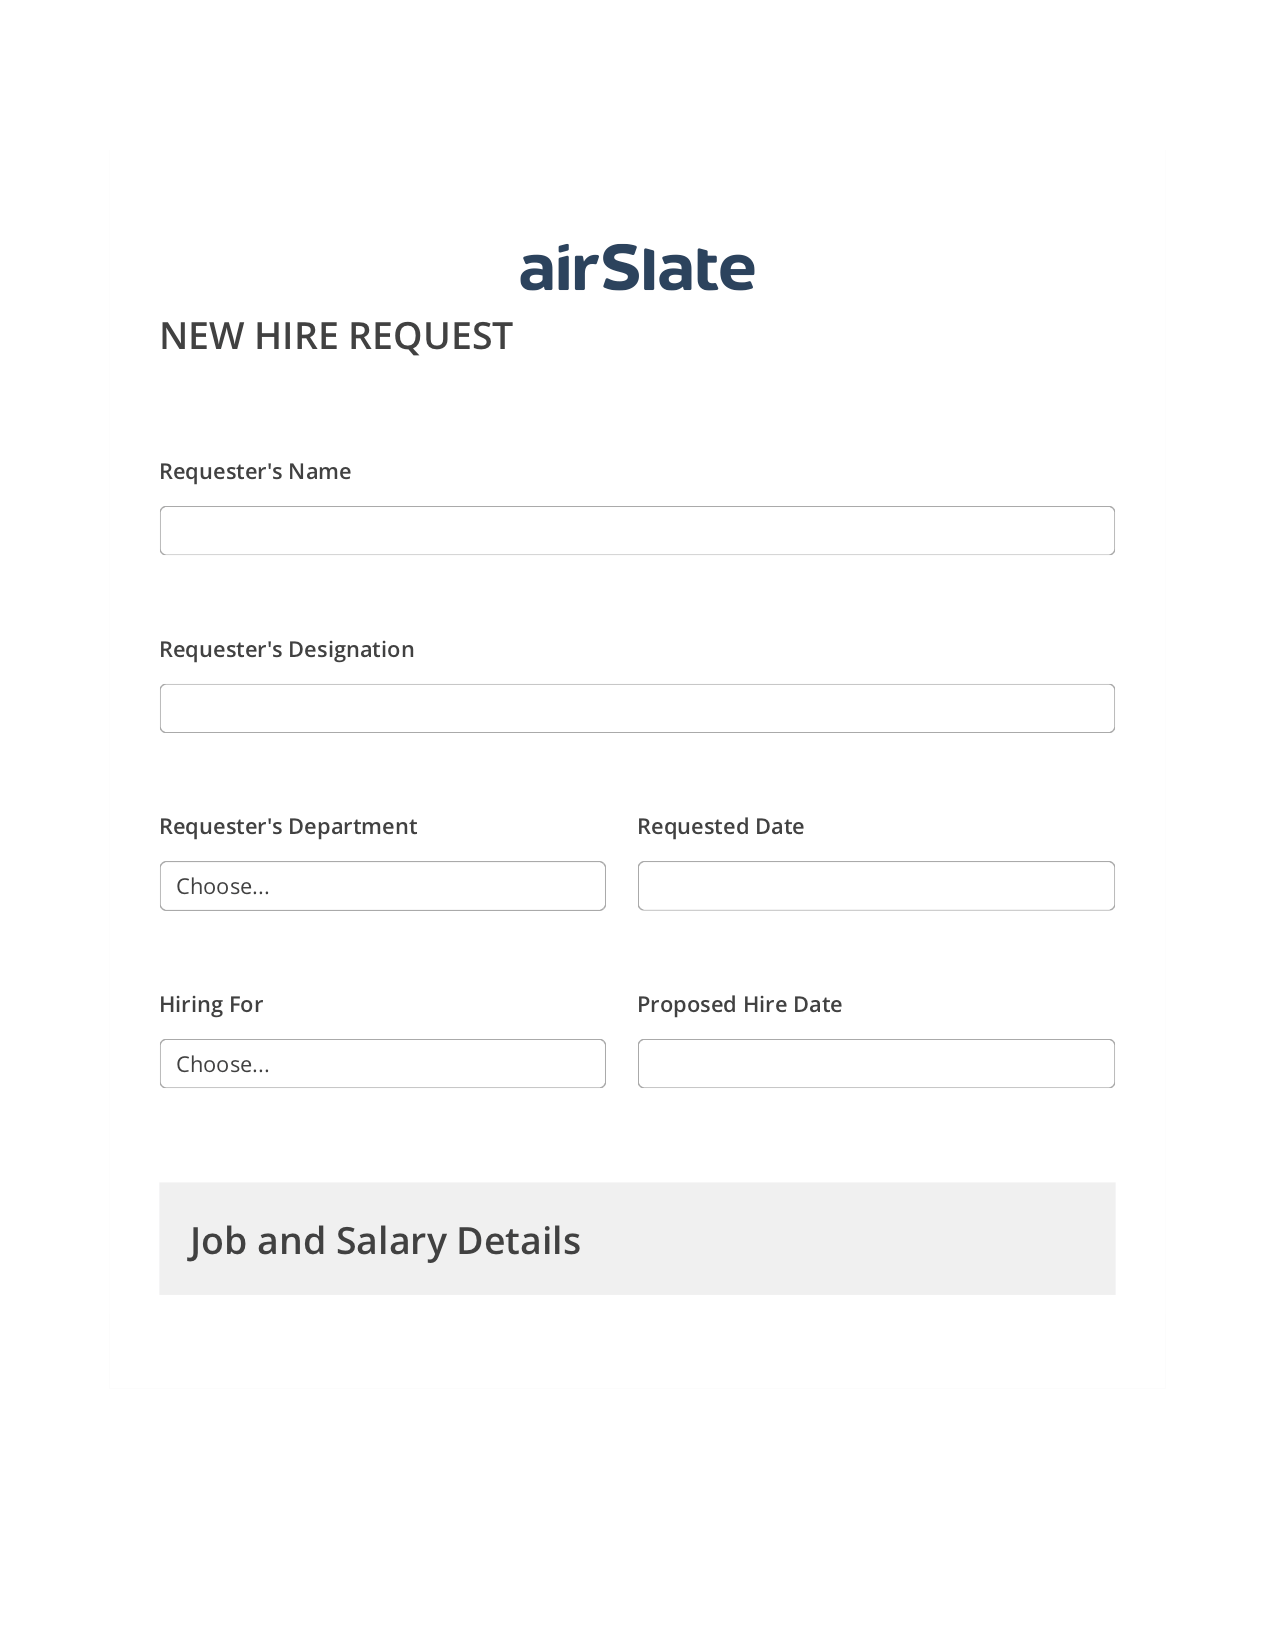 Multirole Hiring Request Workflow Pre-fill Dropdowns from CSV file Bot, Revoke Access Bot, Post-finish Document Bot